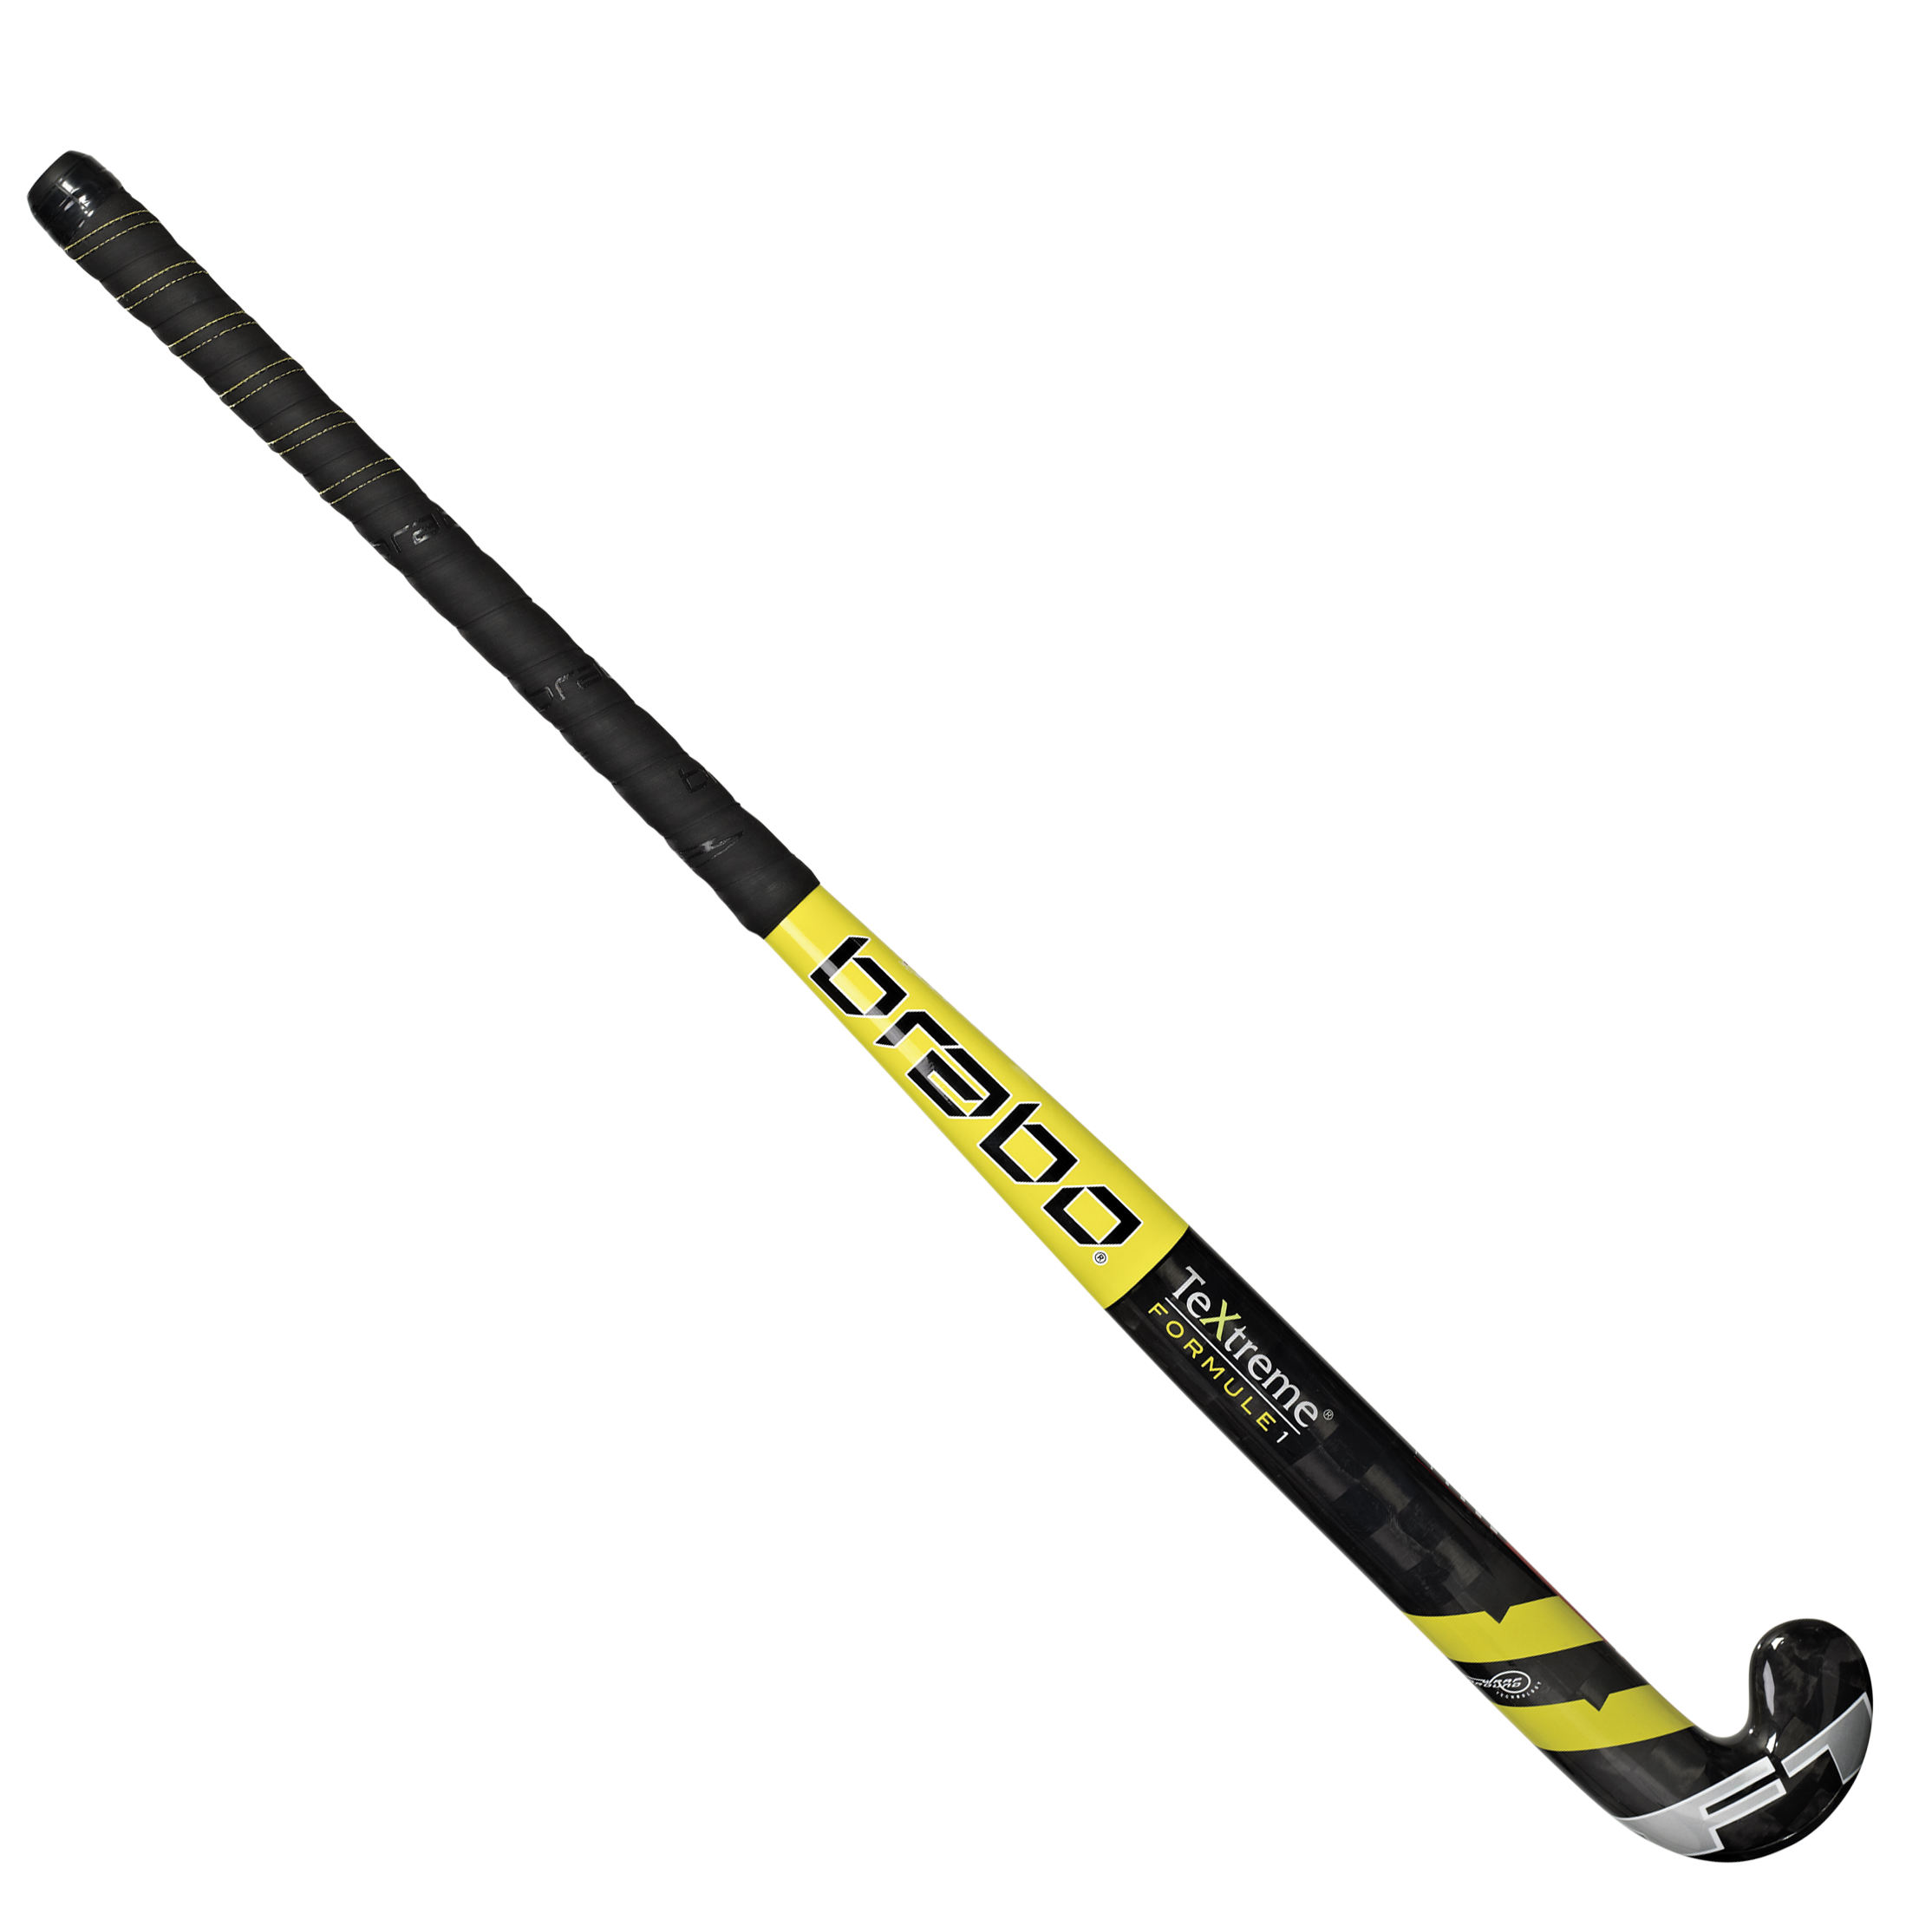 Png Hockey Stick - Hockey Stick Png, Transparent background PNG HD thumbnail